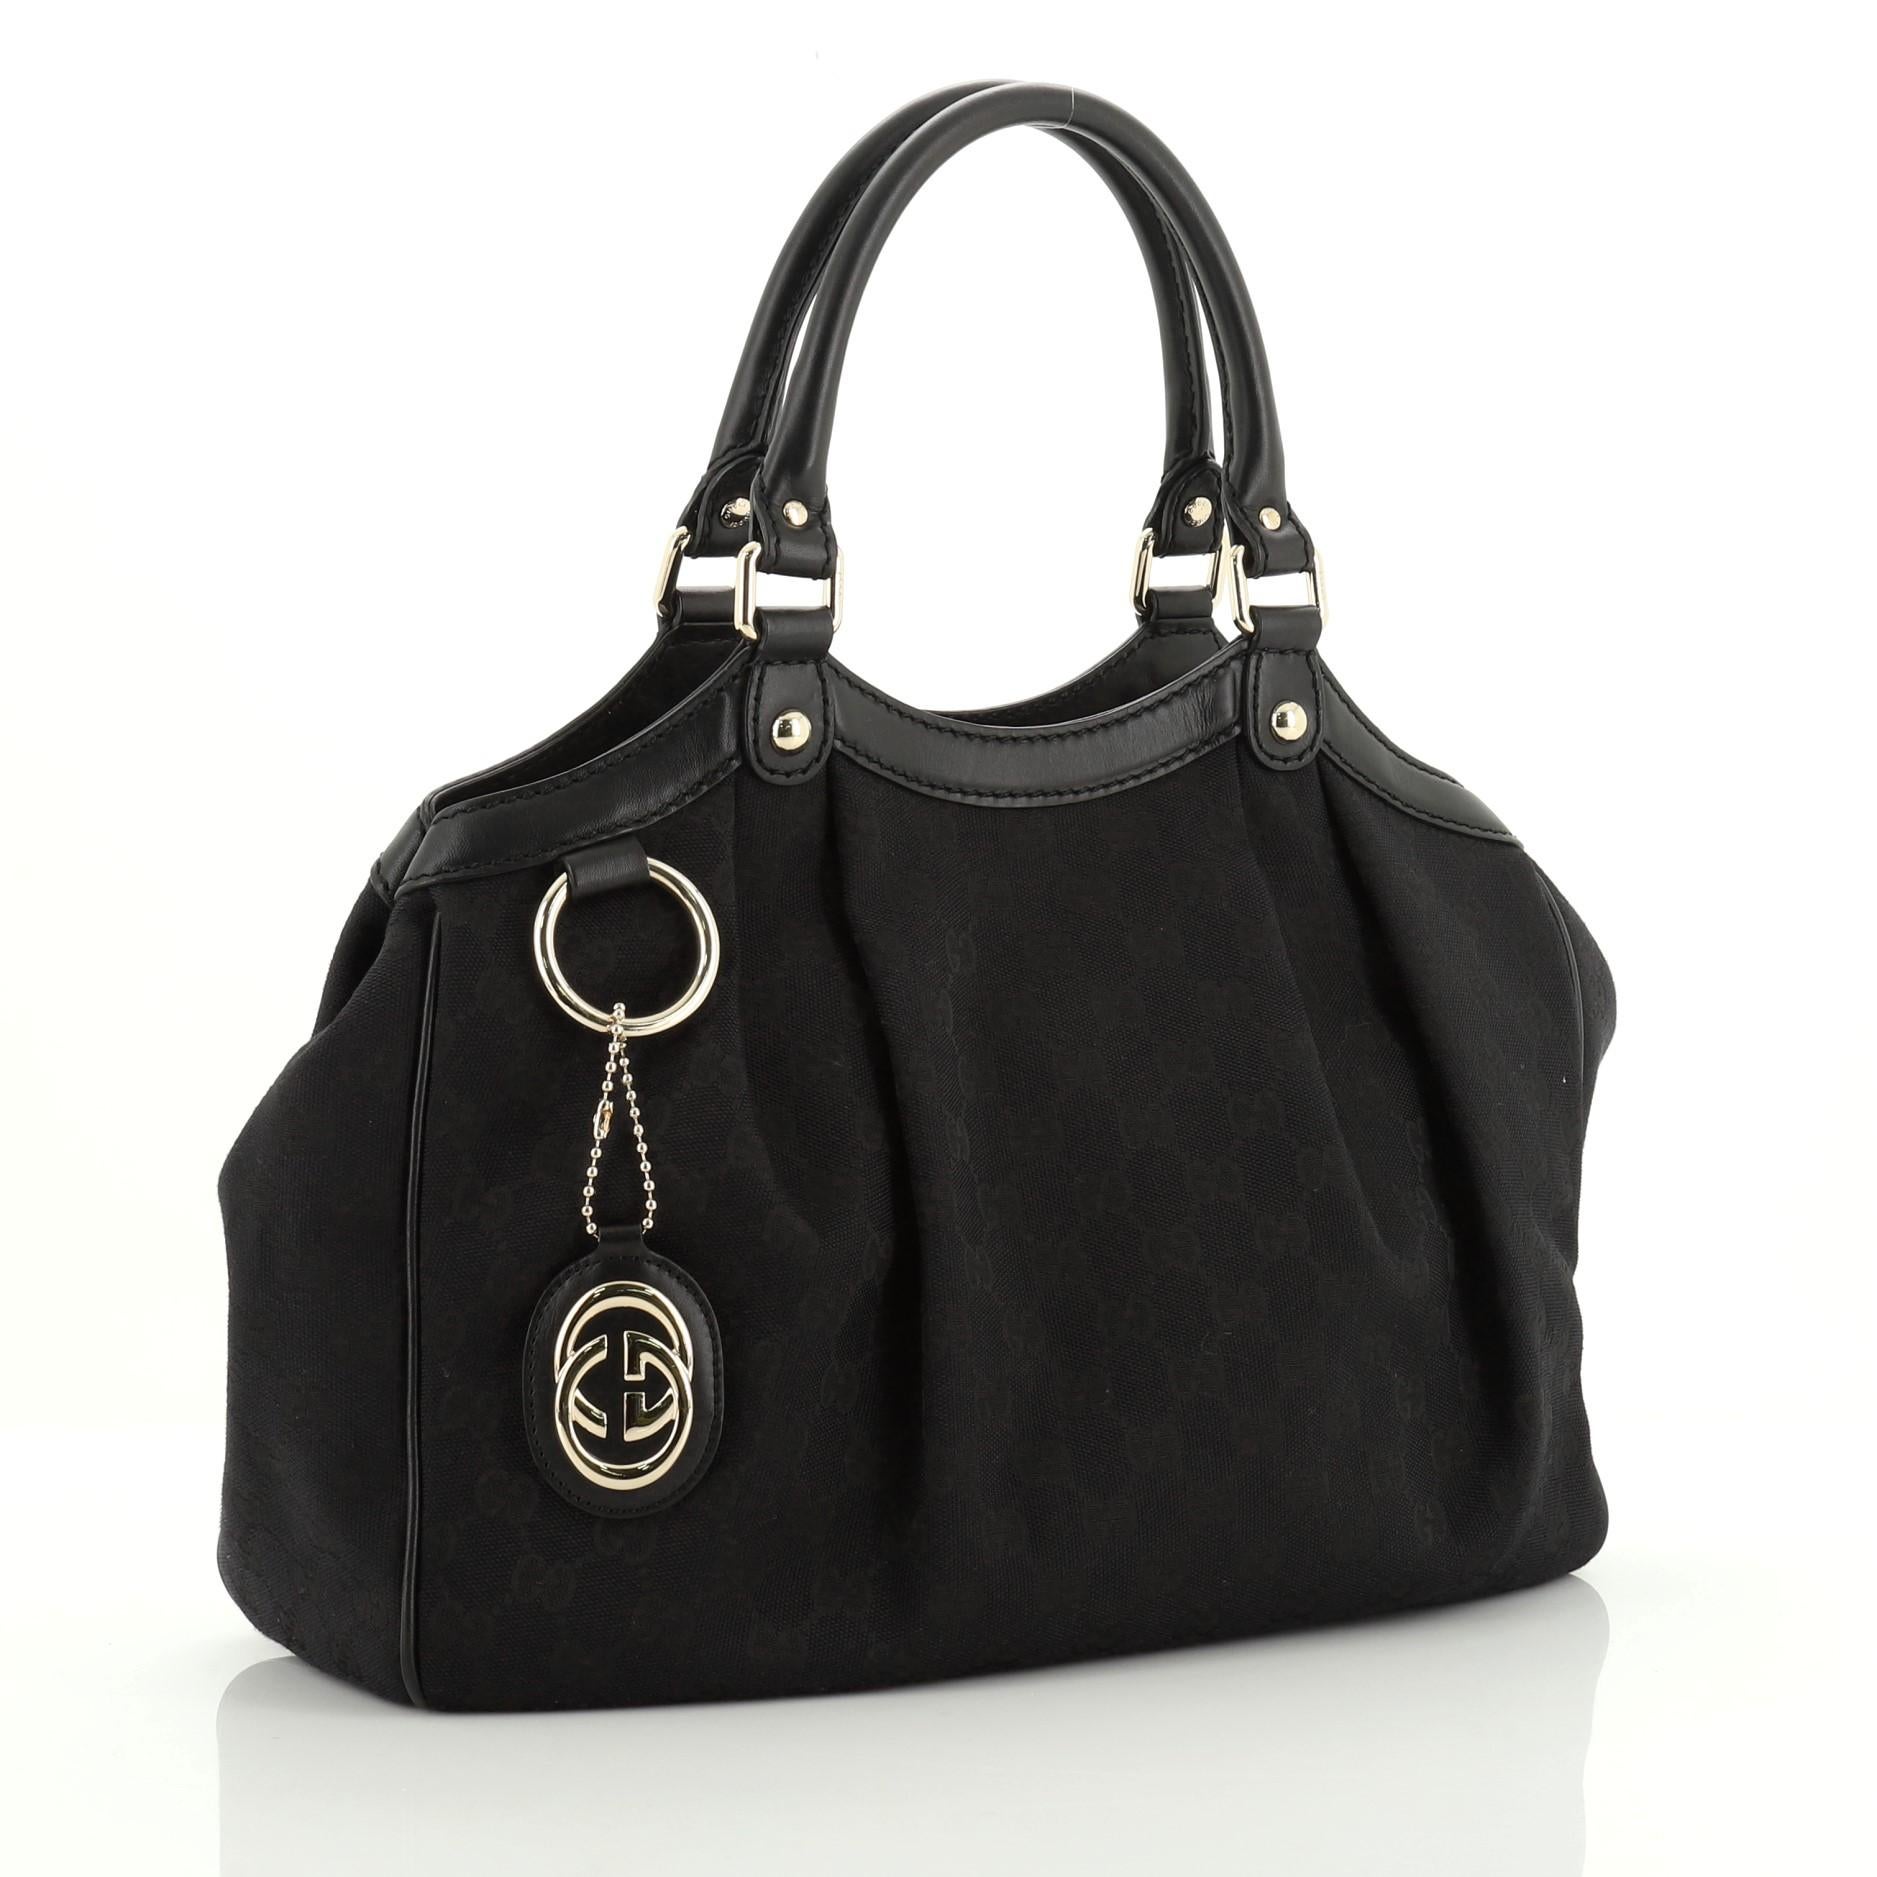 This Gucci Sukey Tote GG Canvas Medium, crafted from black GG canvas, features dual rolled leather handles, leather trim, and gold-tone hardware. Its magnetic snap closure opens to a neutral fabric and canvas interior with side zip pocket.